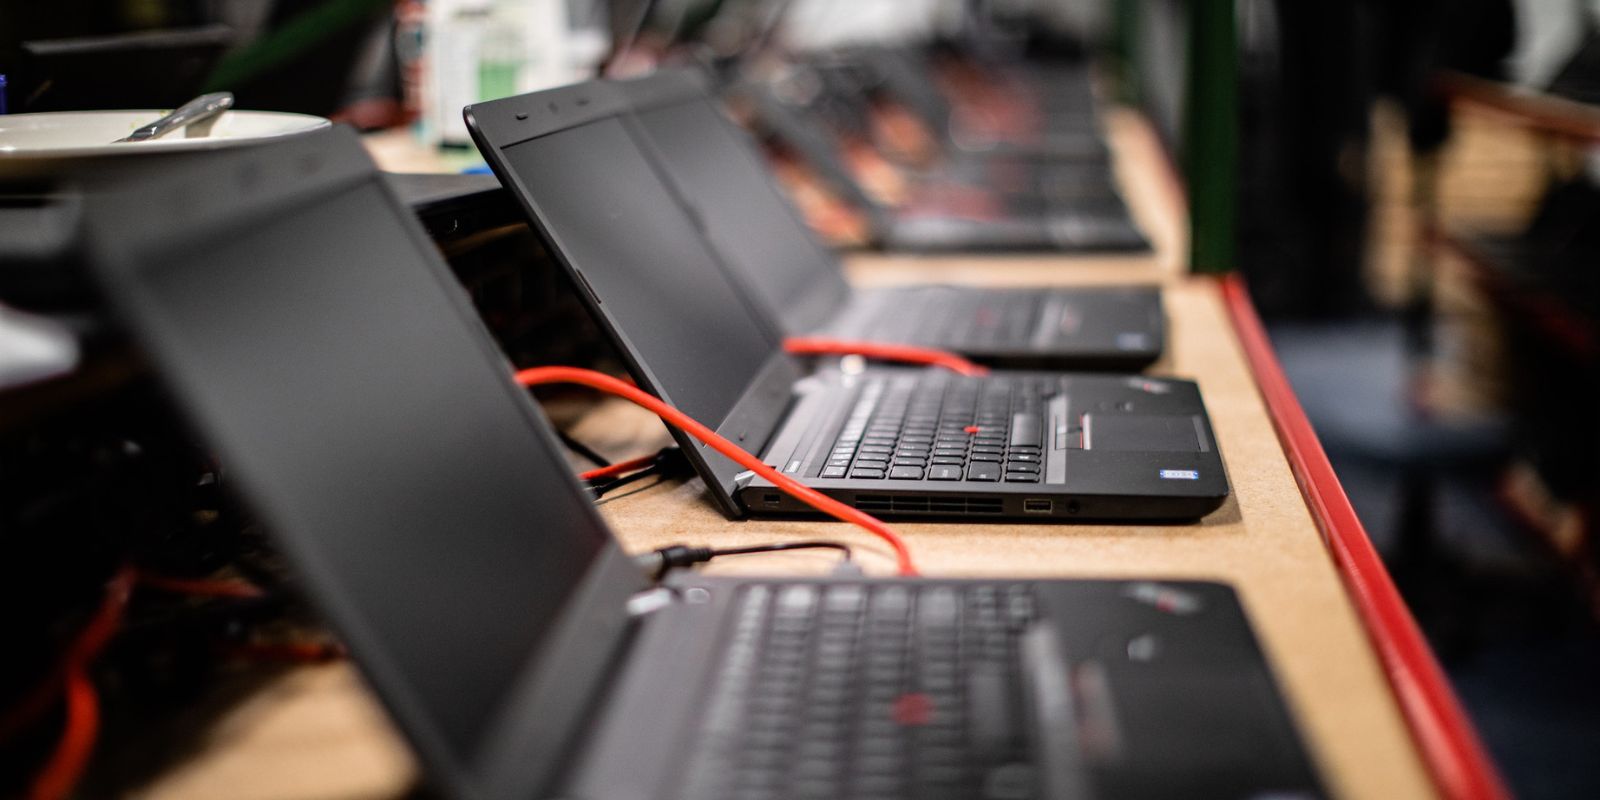 rental laptops in a row being imaged on a warehouse bench